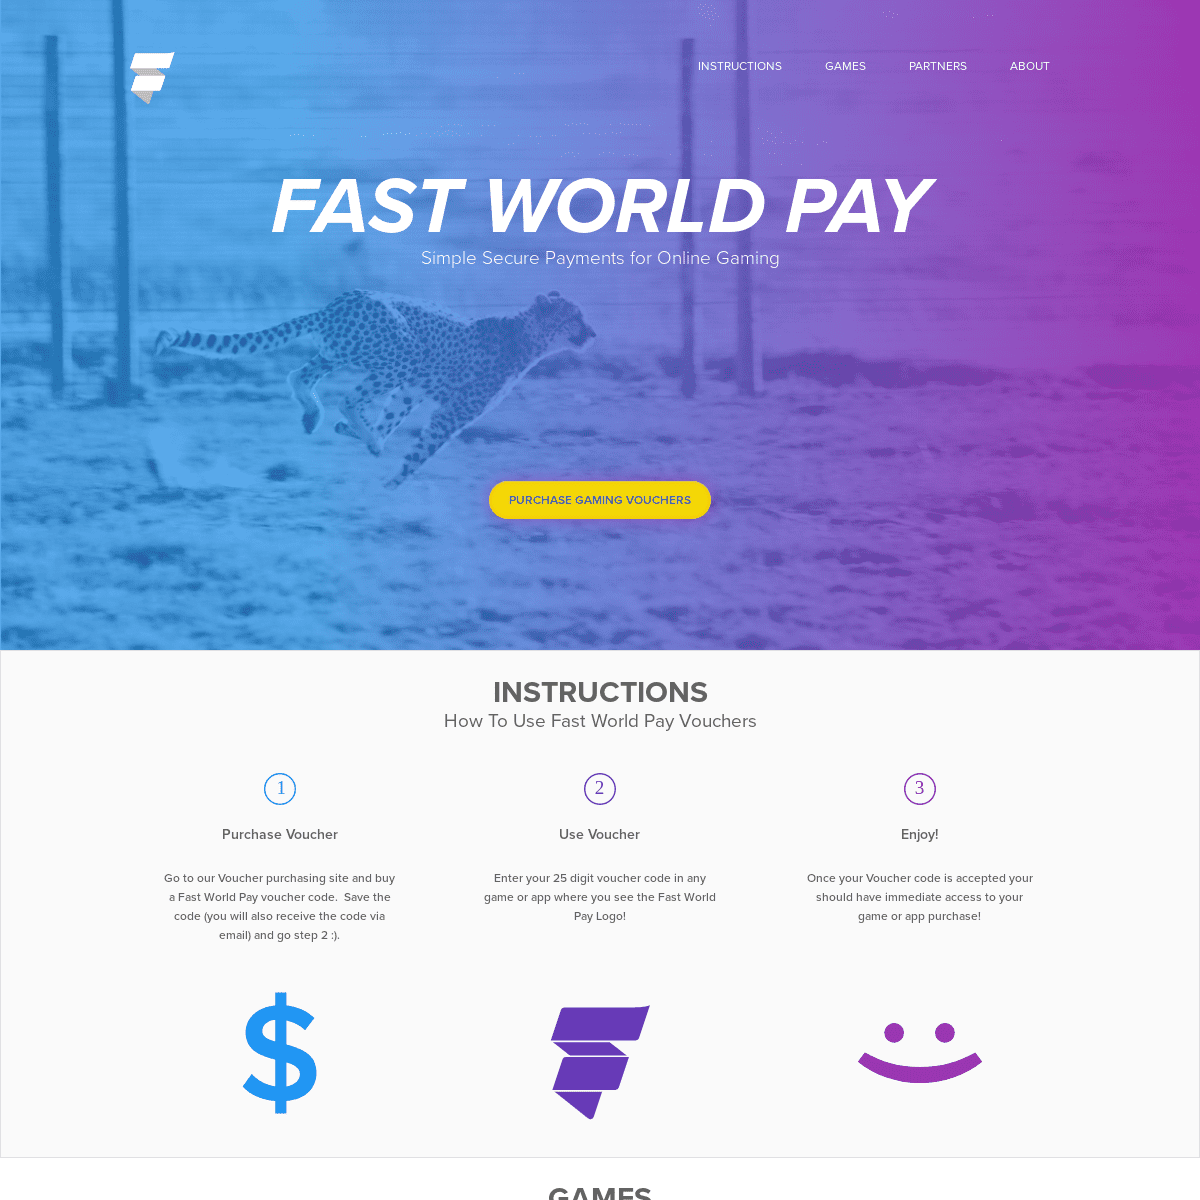 A complete backup of fastworldpay.com